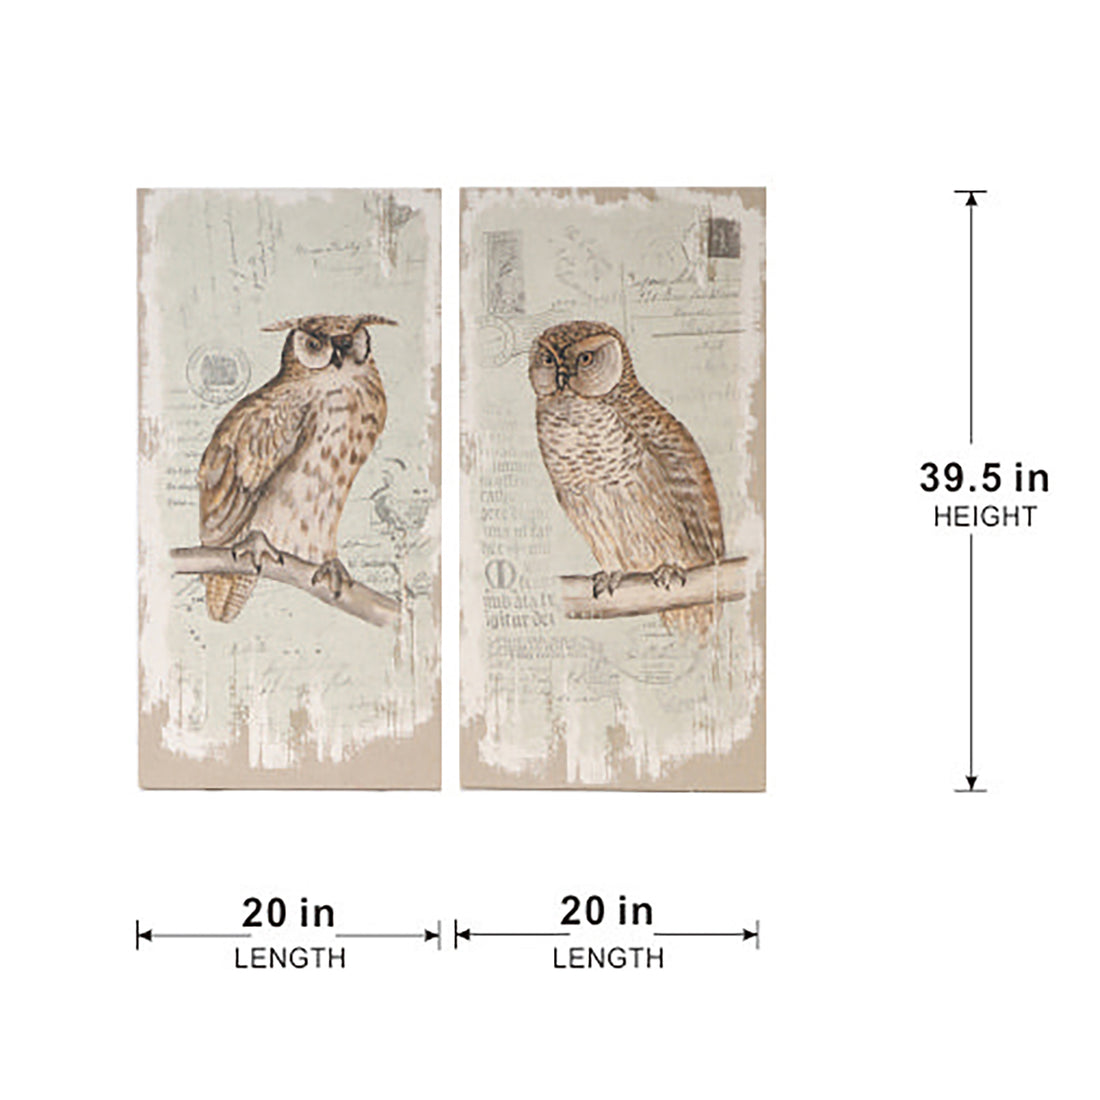 Set of 2 Lilith Owl Prints with Distressed Look